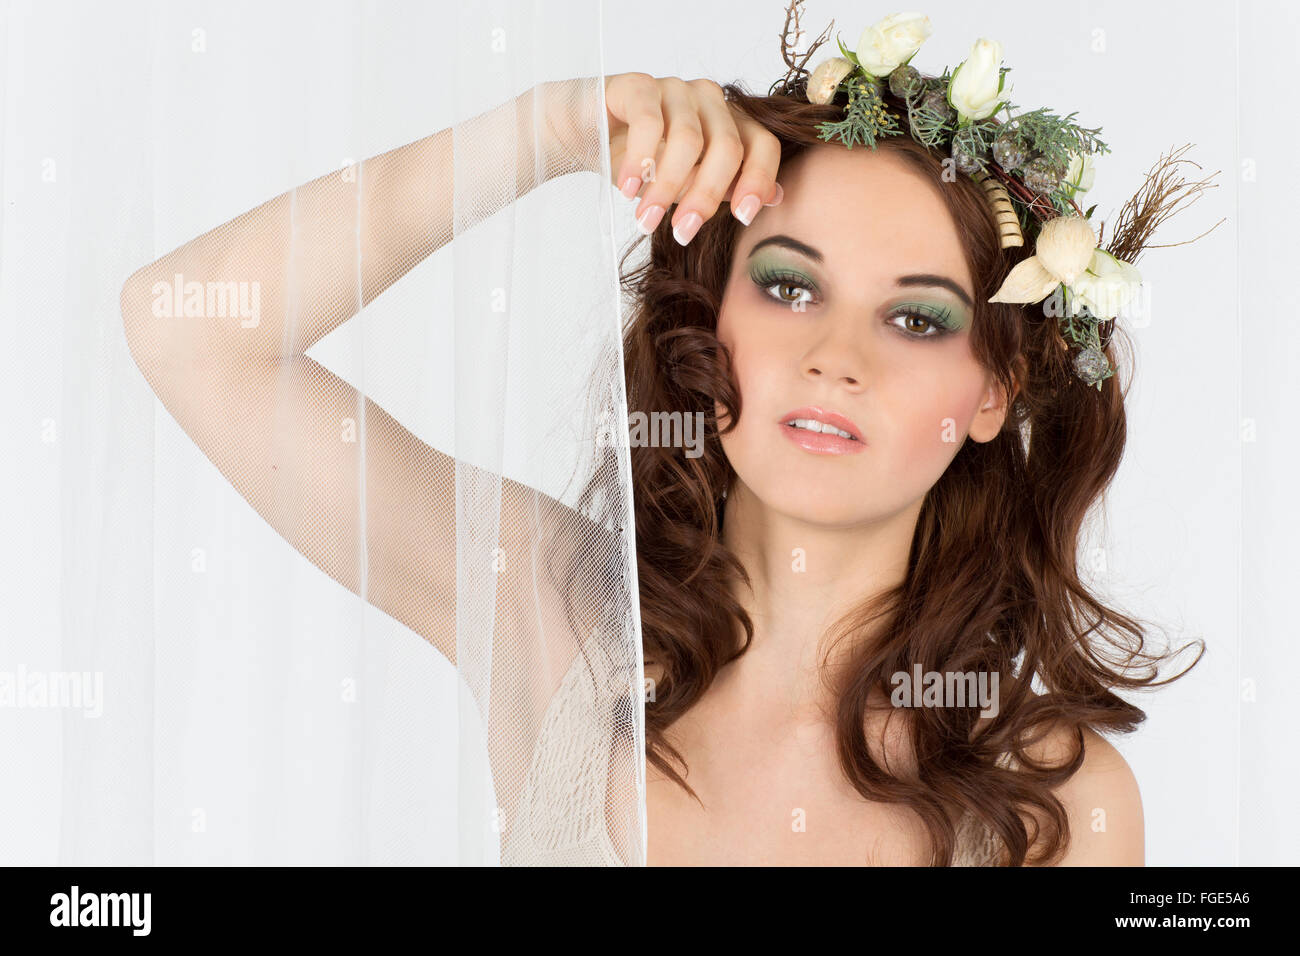 Young woman with flower arrangement as a headdress Stock Photo